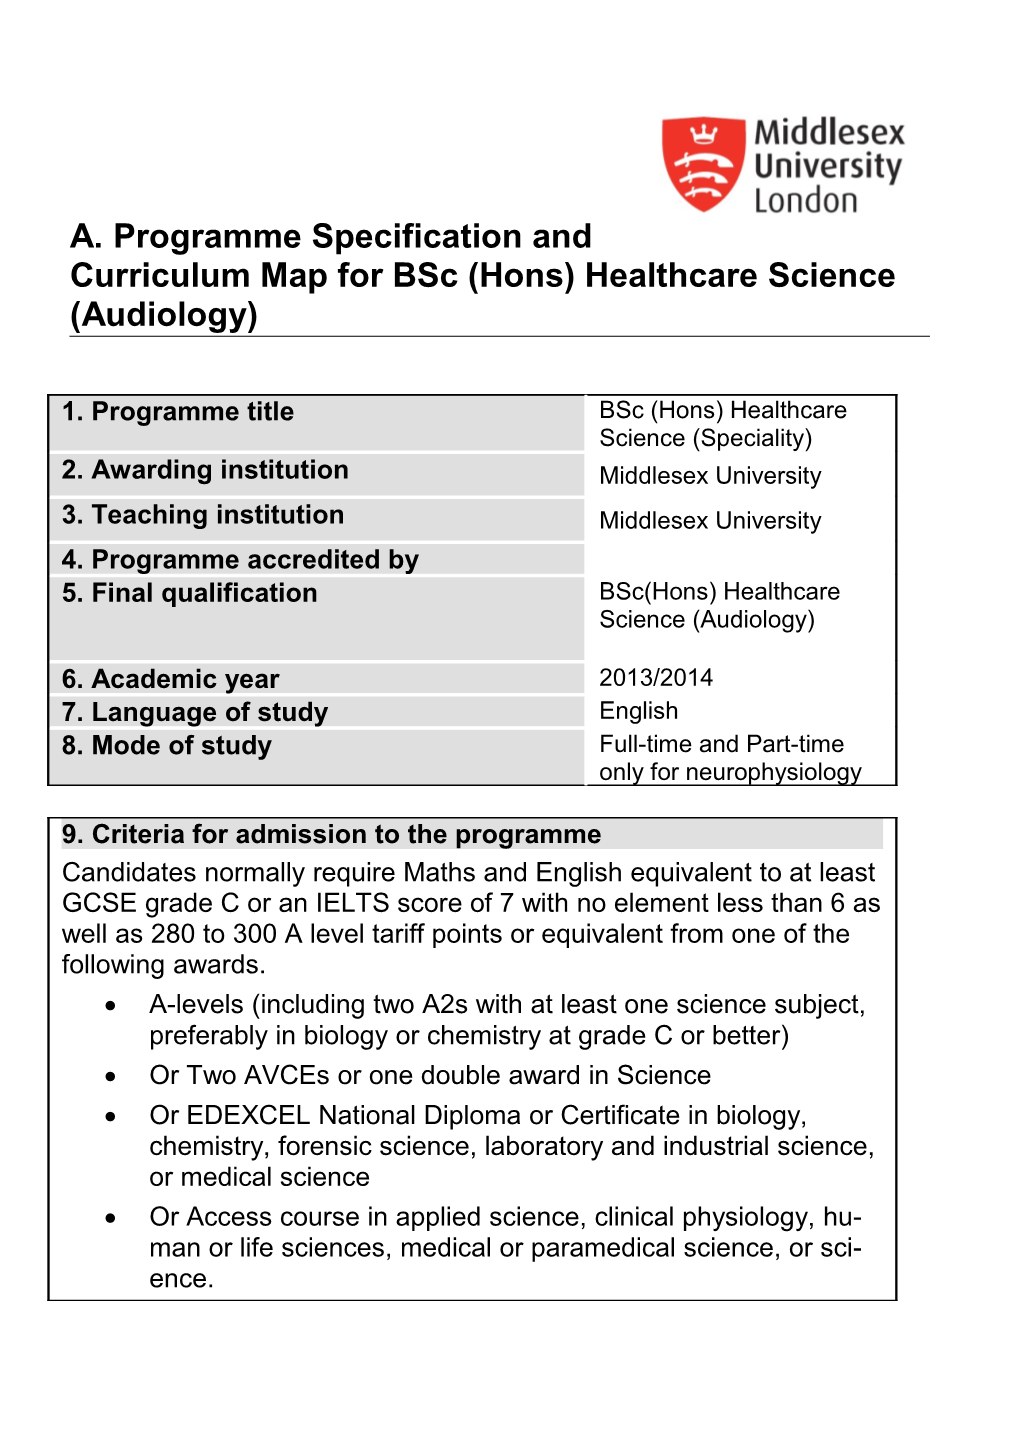 A. Programme Specification and Curriculum Map for Bsc (Hons) Healthcare Science (Audiology)